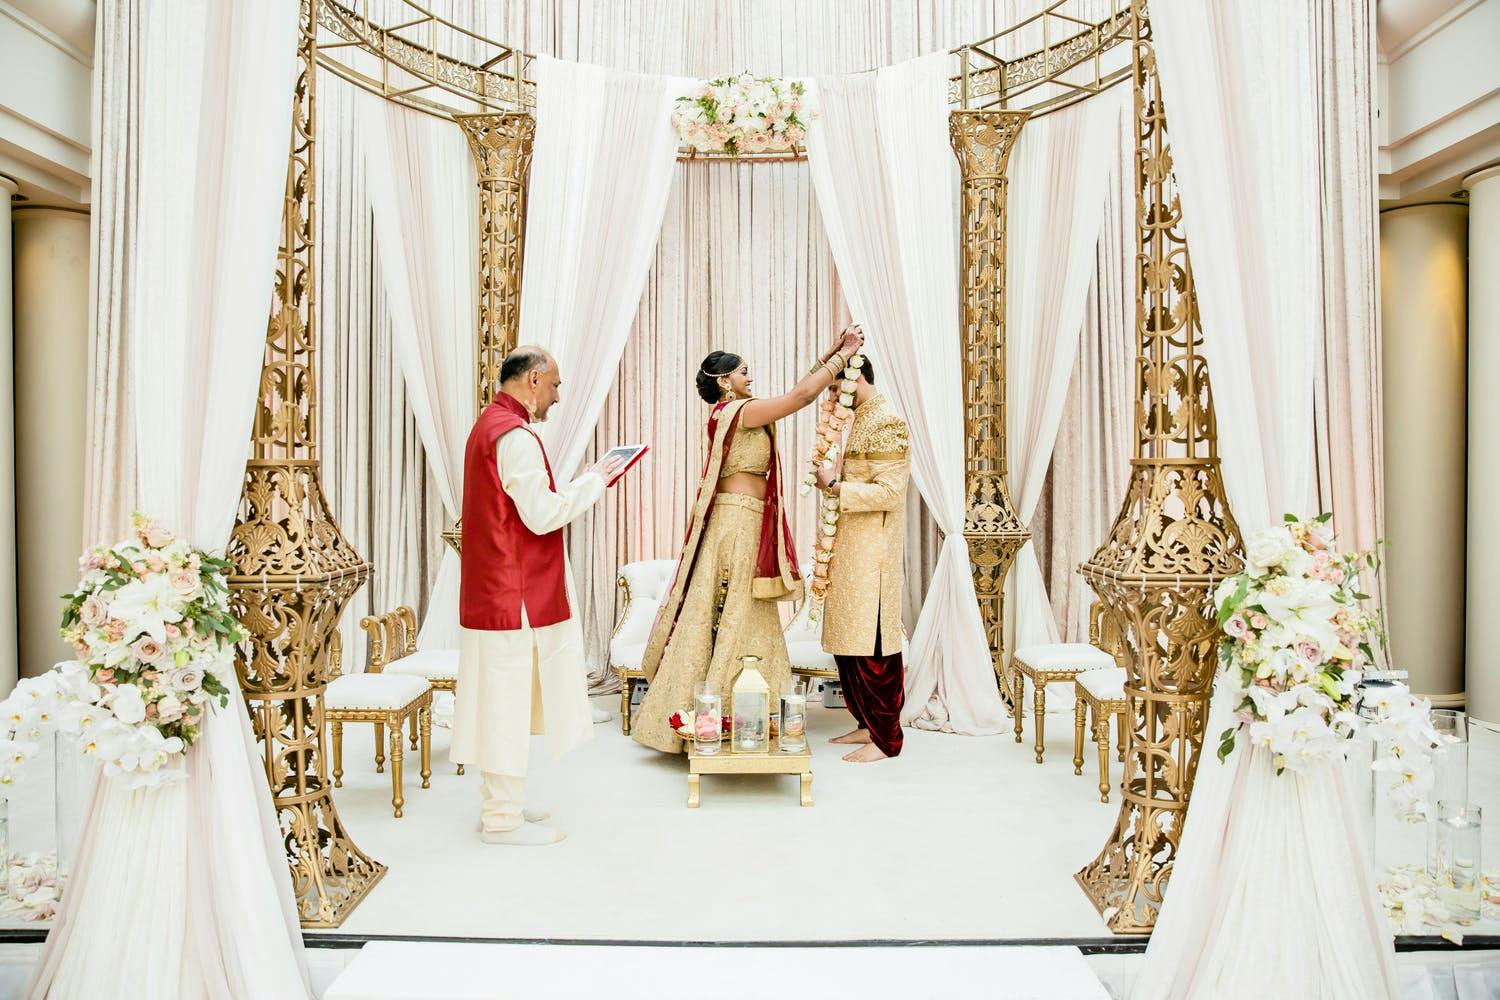 Mandap With Elegant Gold Pillars and Dreamy Pink Drapery | PartySlate